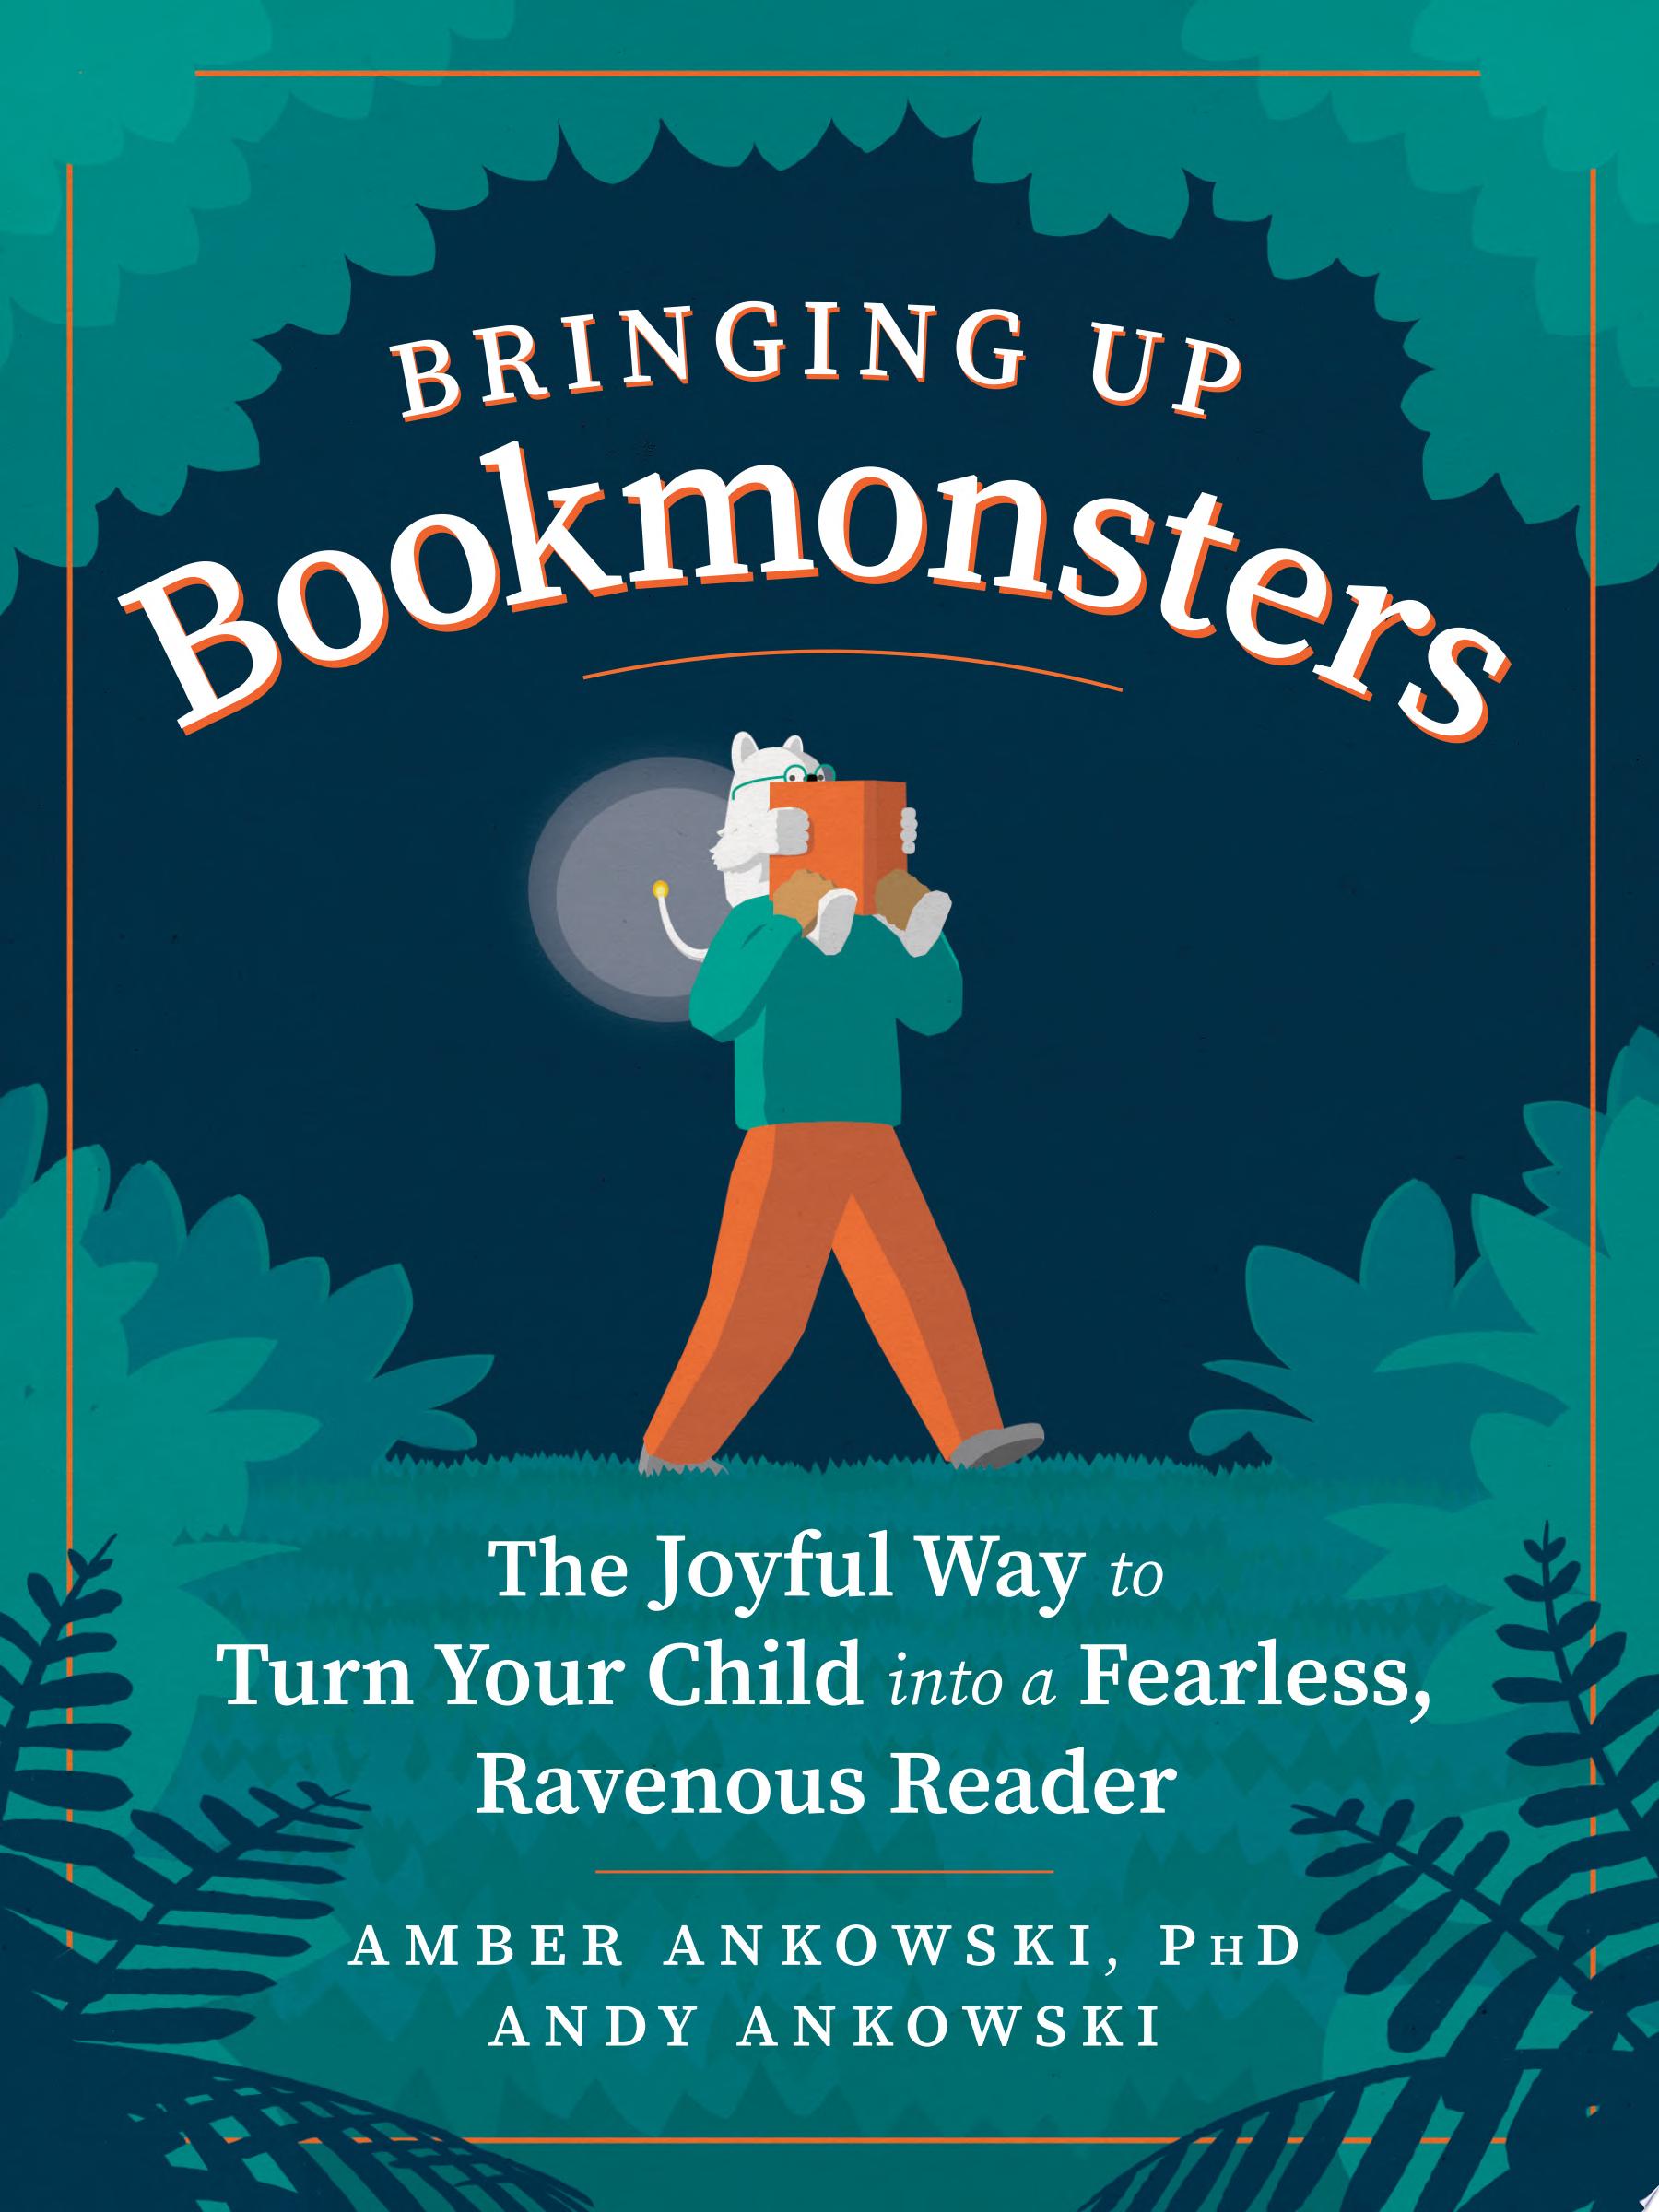 Image for "Bringing Up Bookmonsters"